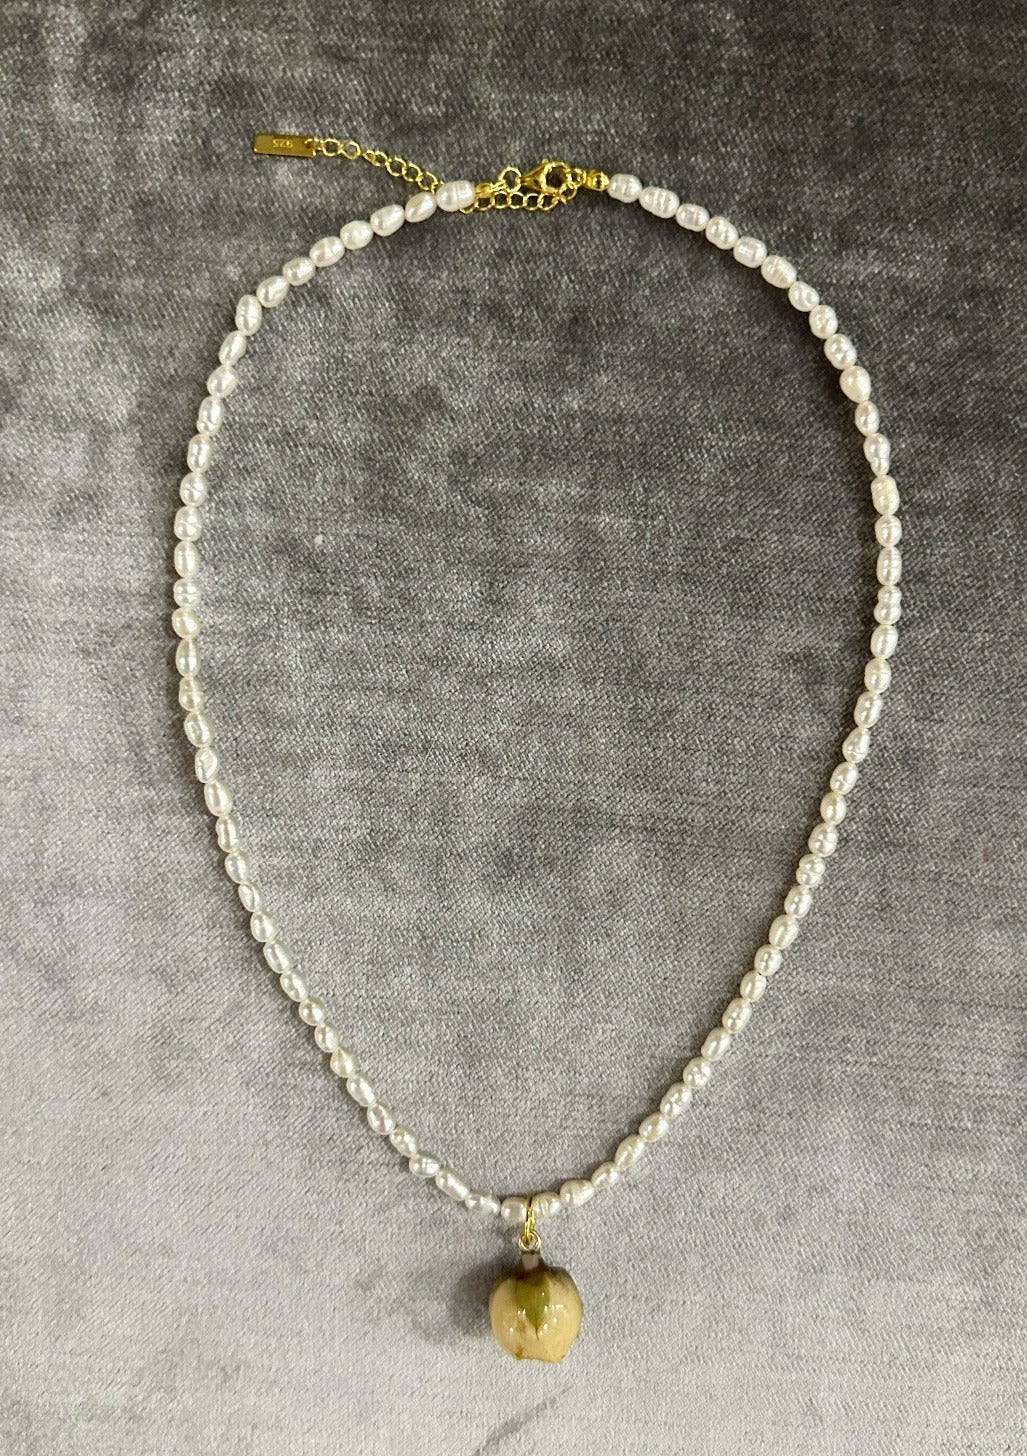 Freshwater rice pearl necklace with preserved rosebud pendant.